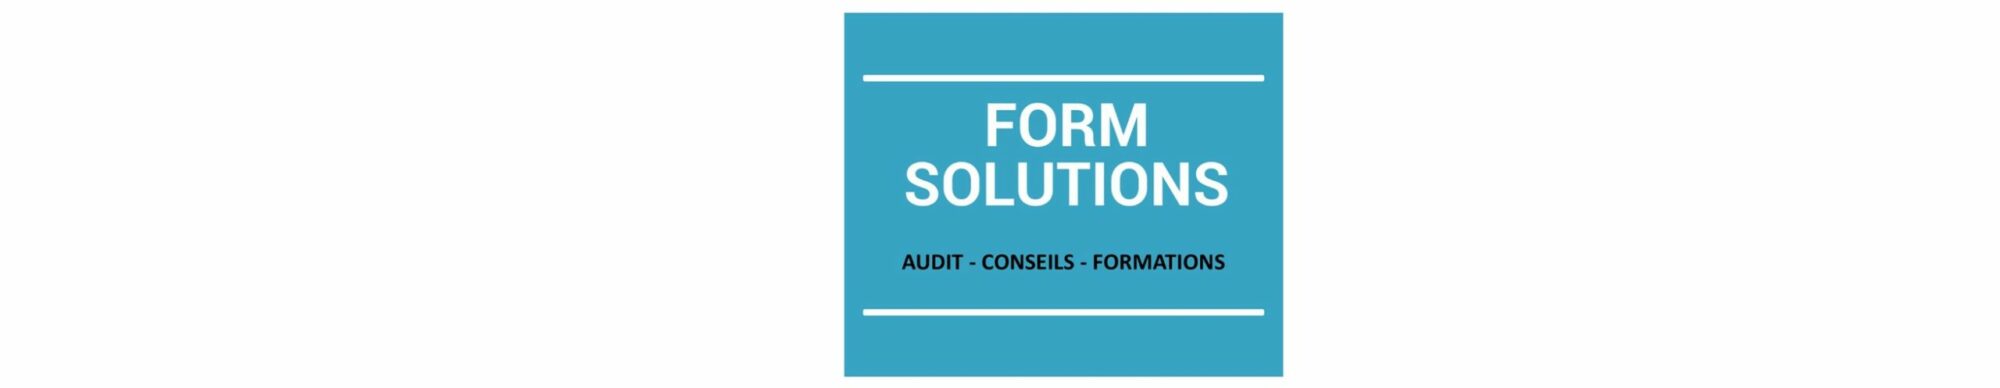 FORM SOLUTIONS